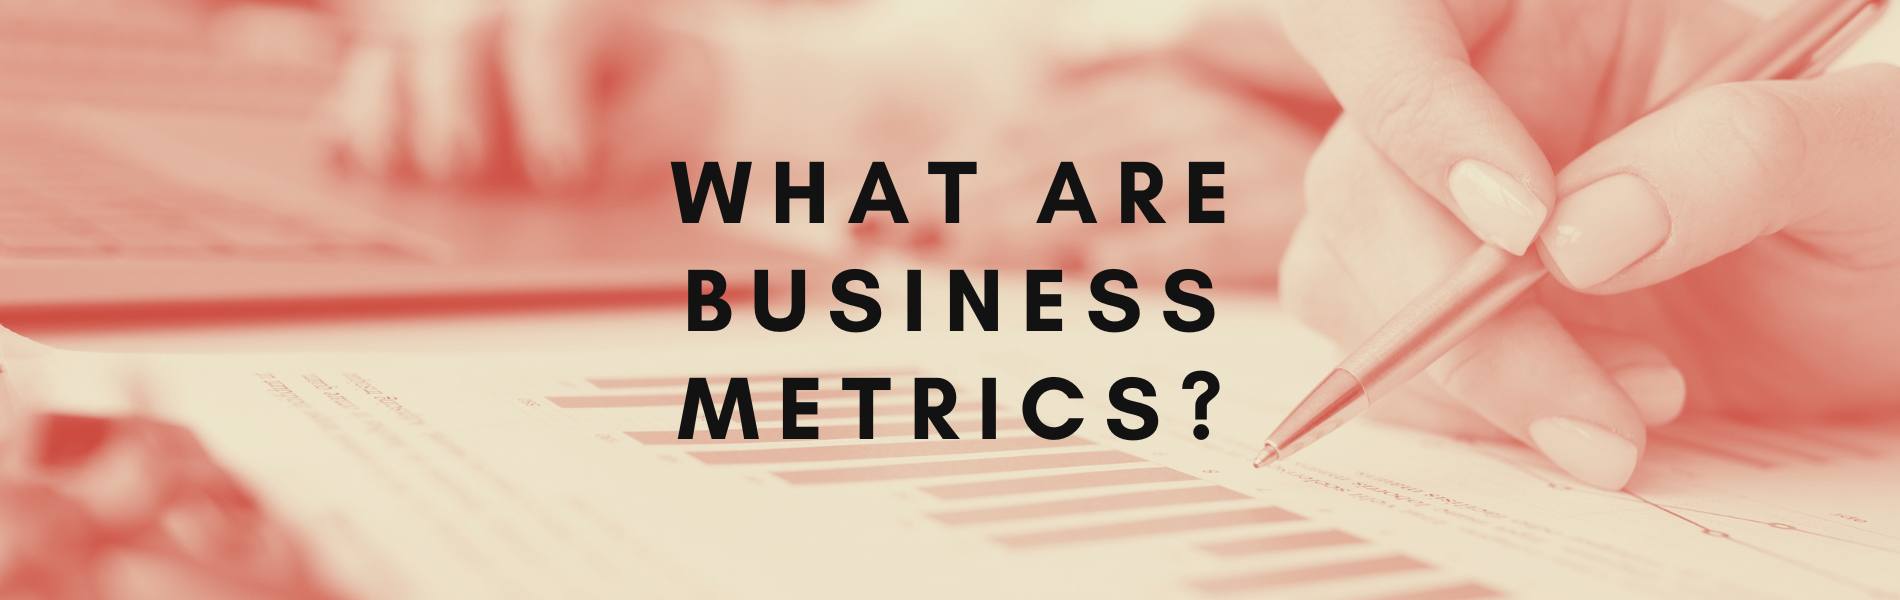 What Are Business Metrics